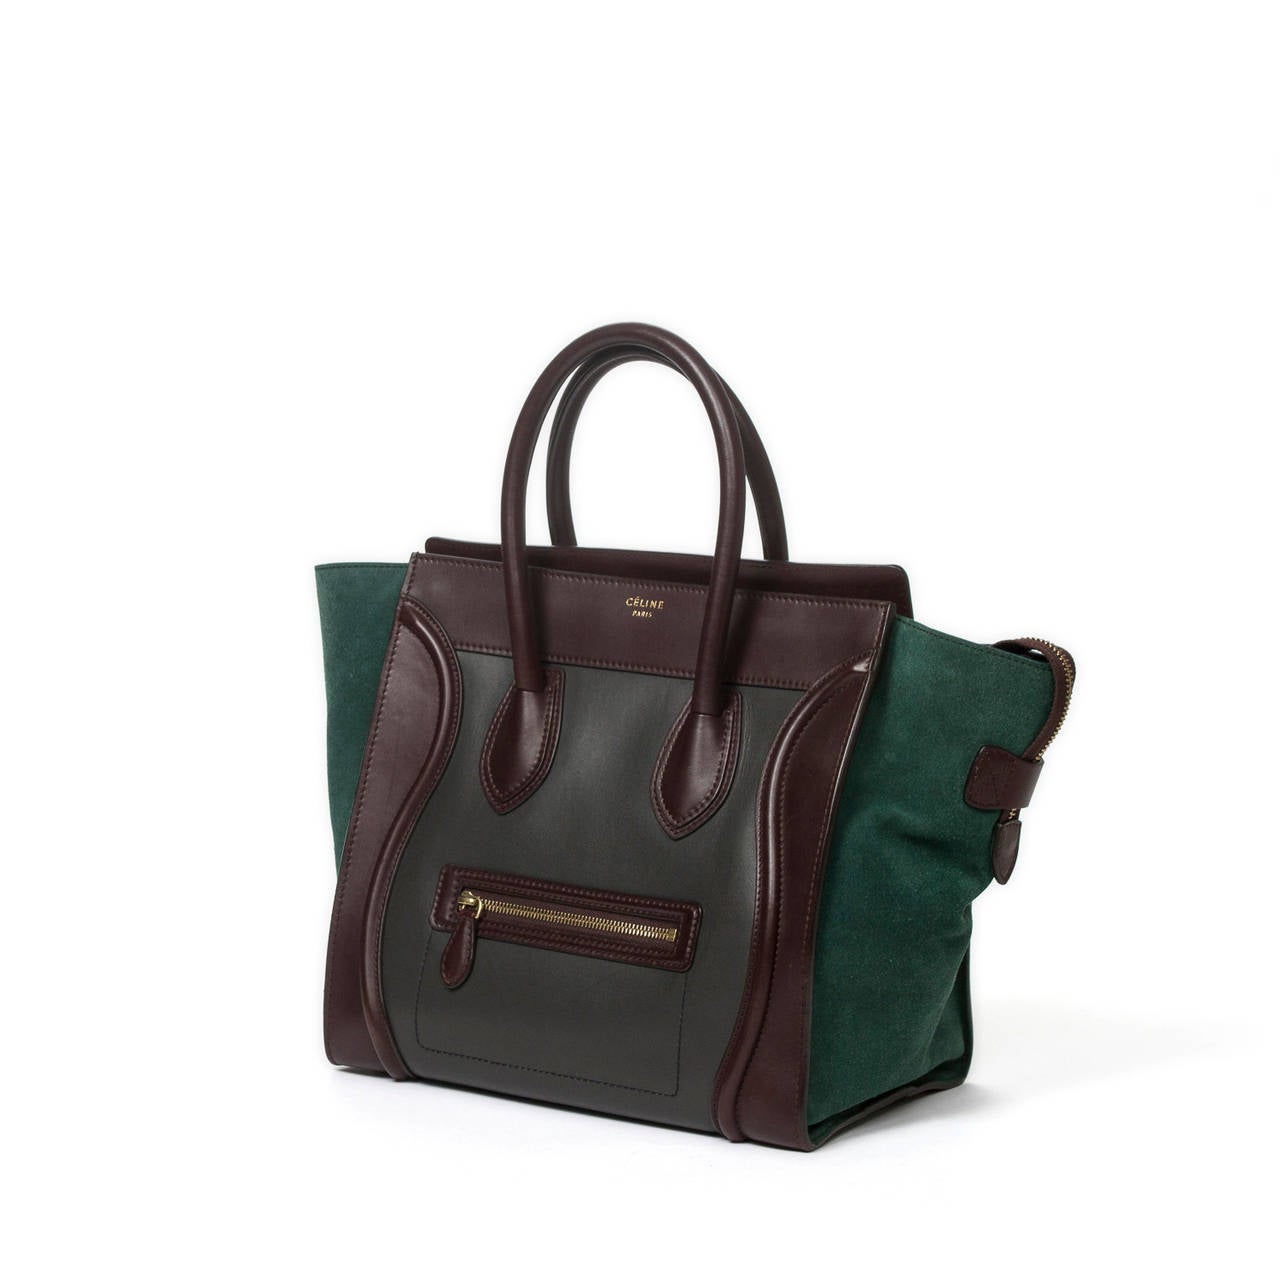 Céline Luggage MM tricolor in mahogany, grey leather and green suede sides, gold tone hardware. Zipper closure, black leather lined interior with 2 slip pockets and one zip pocket. Dustbag included. Slight scuffs on the leather at the corners.